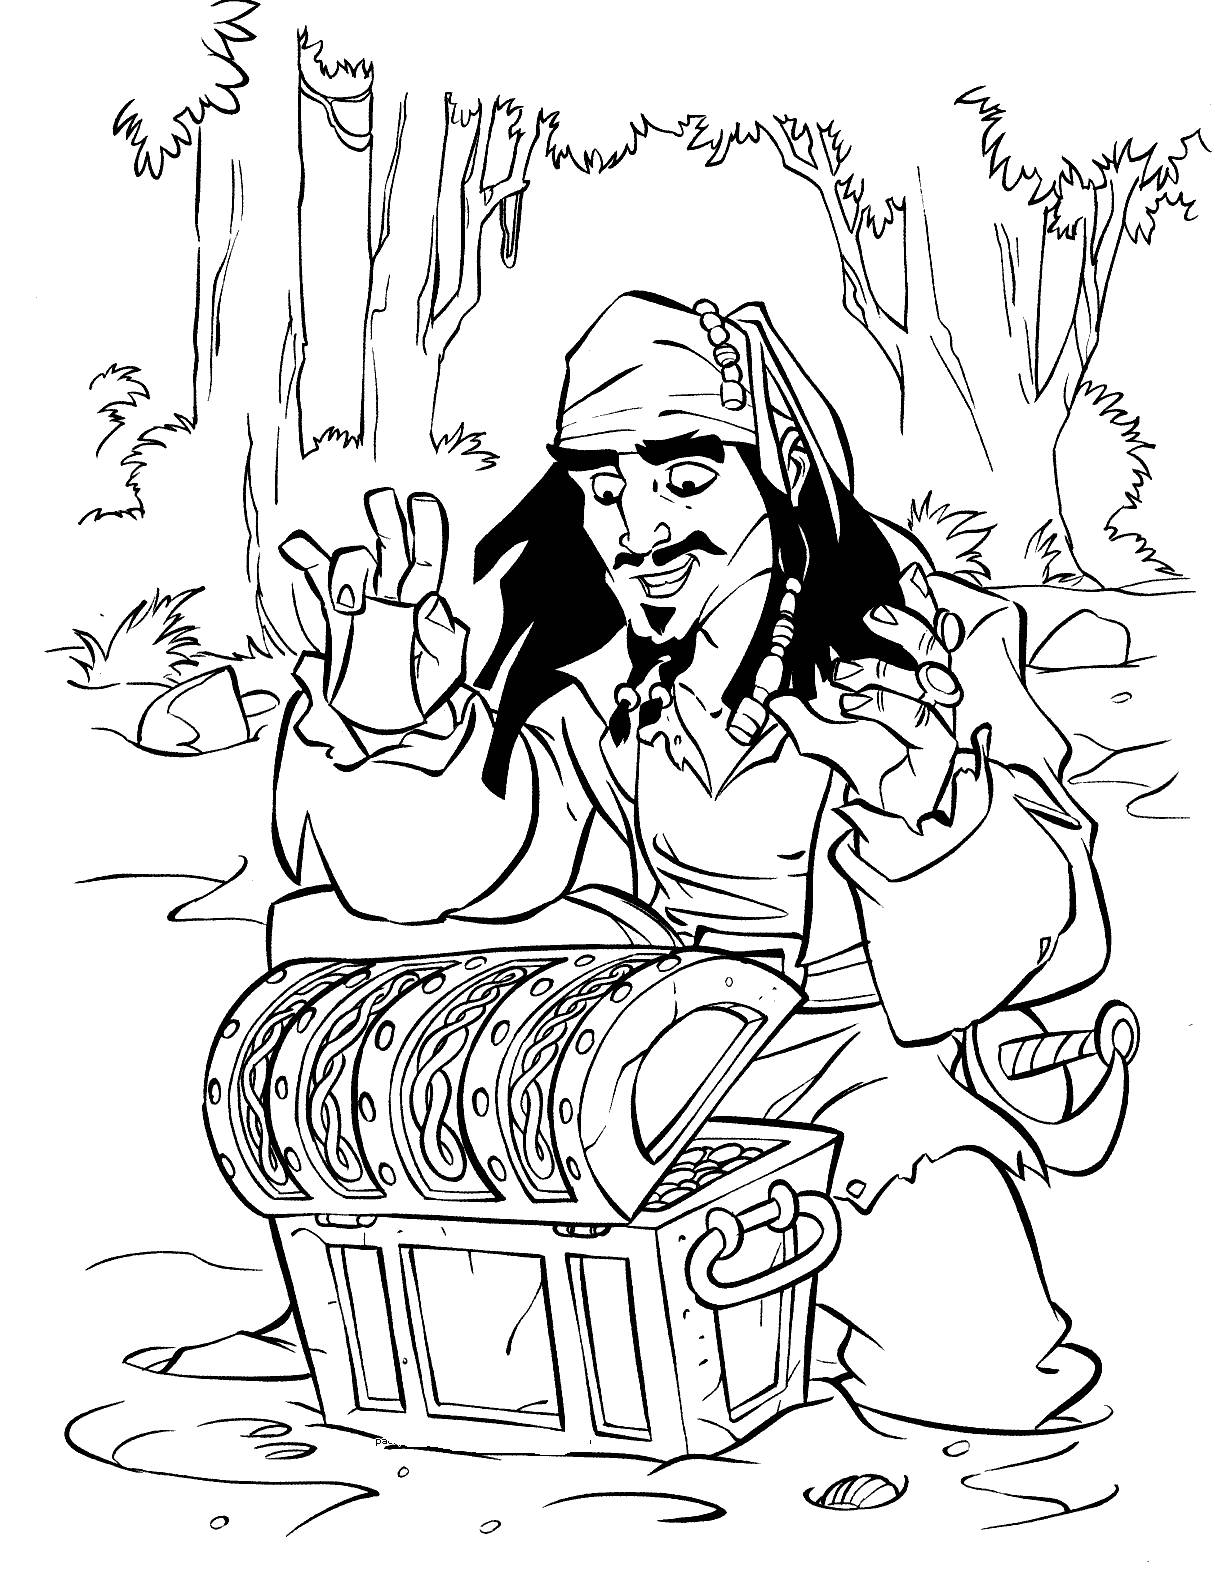 Pirates of the Caribbean coloring pages